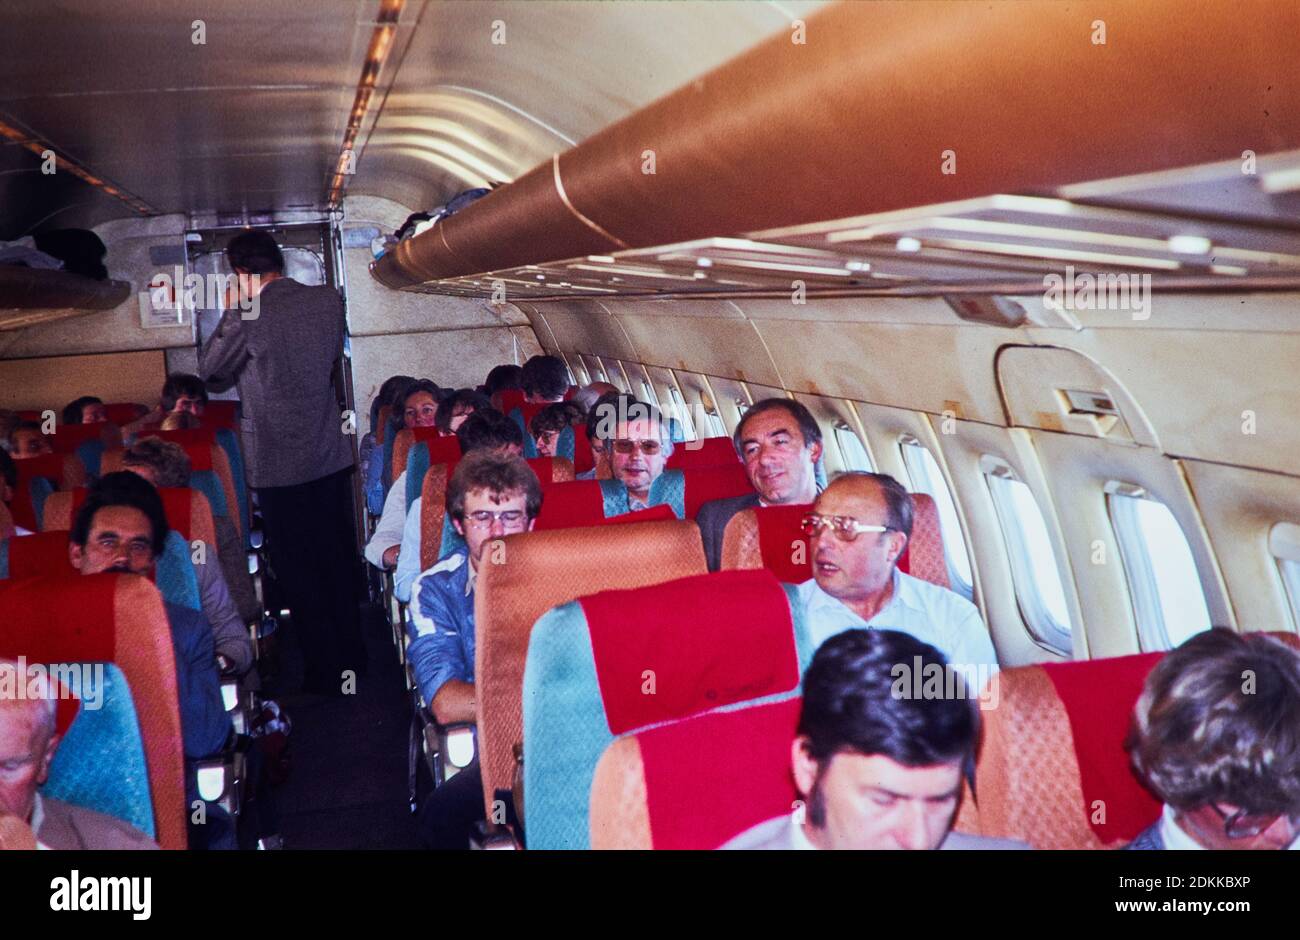 Historical Photo:  Group of business people on board of a McDonnell Douglas DC-9 Tuerk Hava Yollari Turkish Airline THY passenger jet around 1973 in Munich, Riem Airport on the way to Turkey. Reproduction in Marktoberdorf, Germany, October 26, 2020.  © Peter Schatz / Alamy Stock Photos Stock Photo